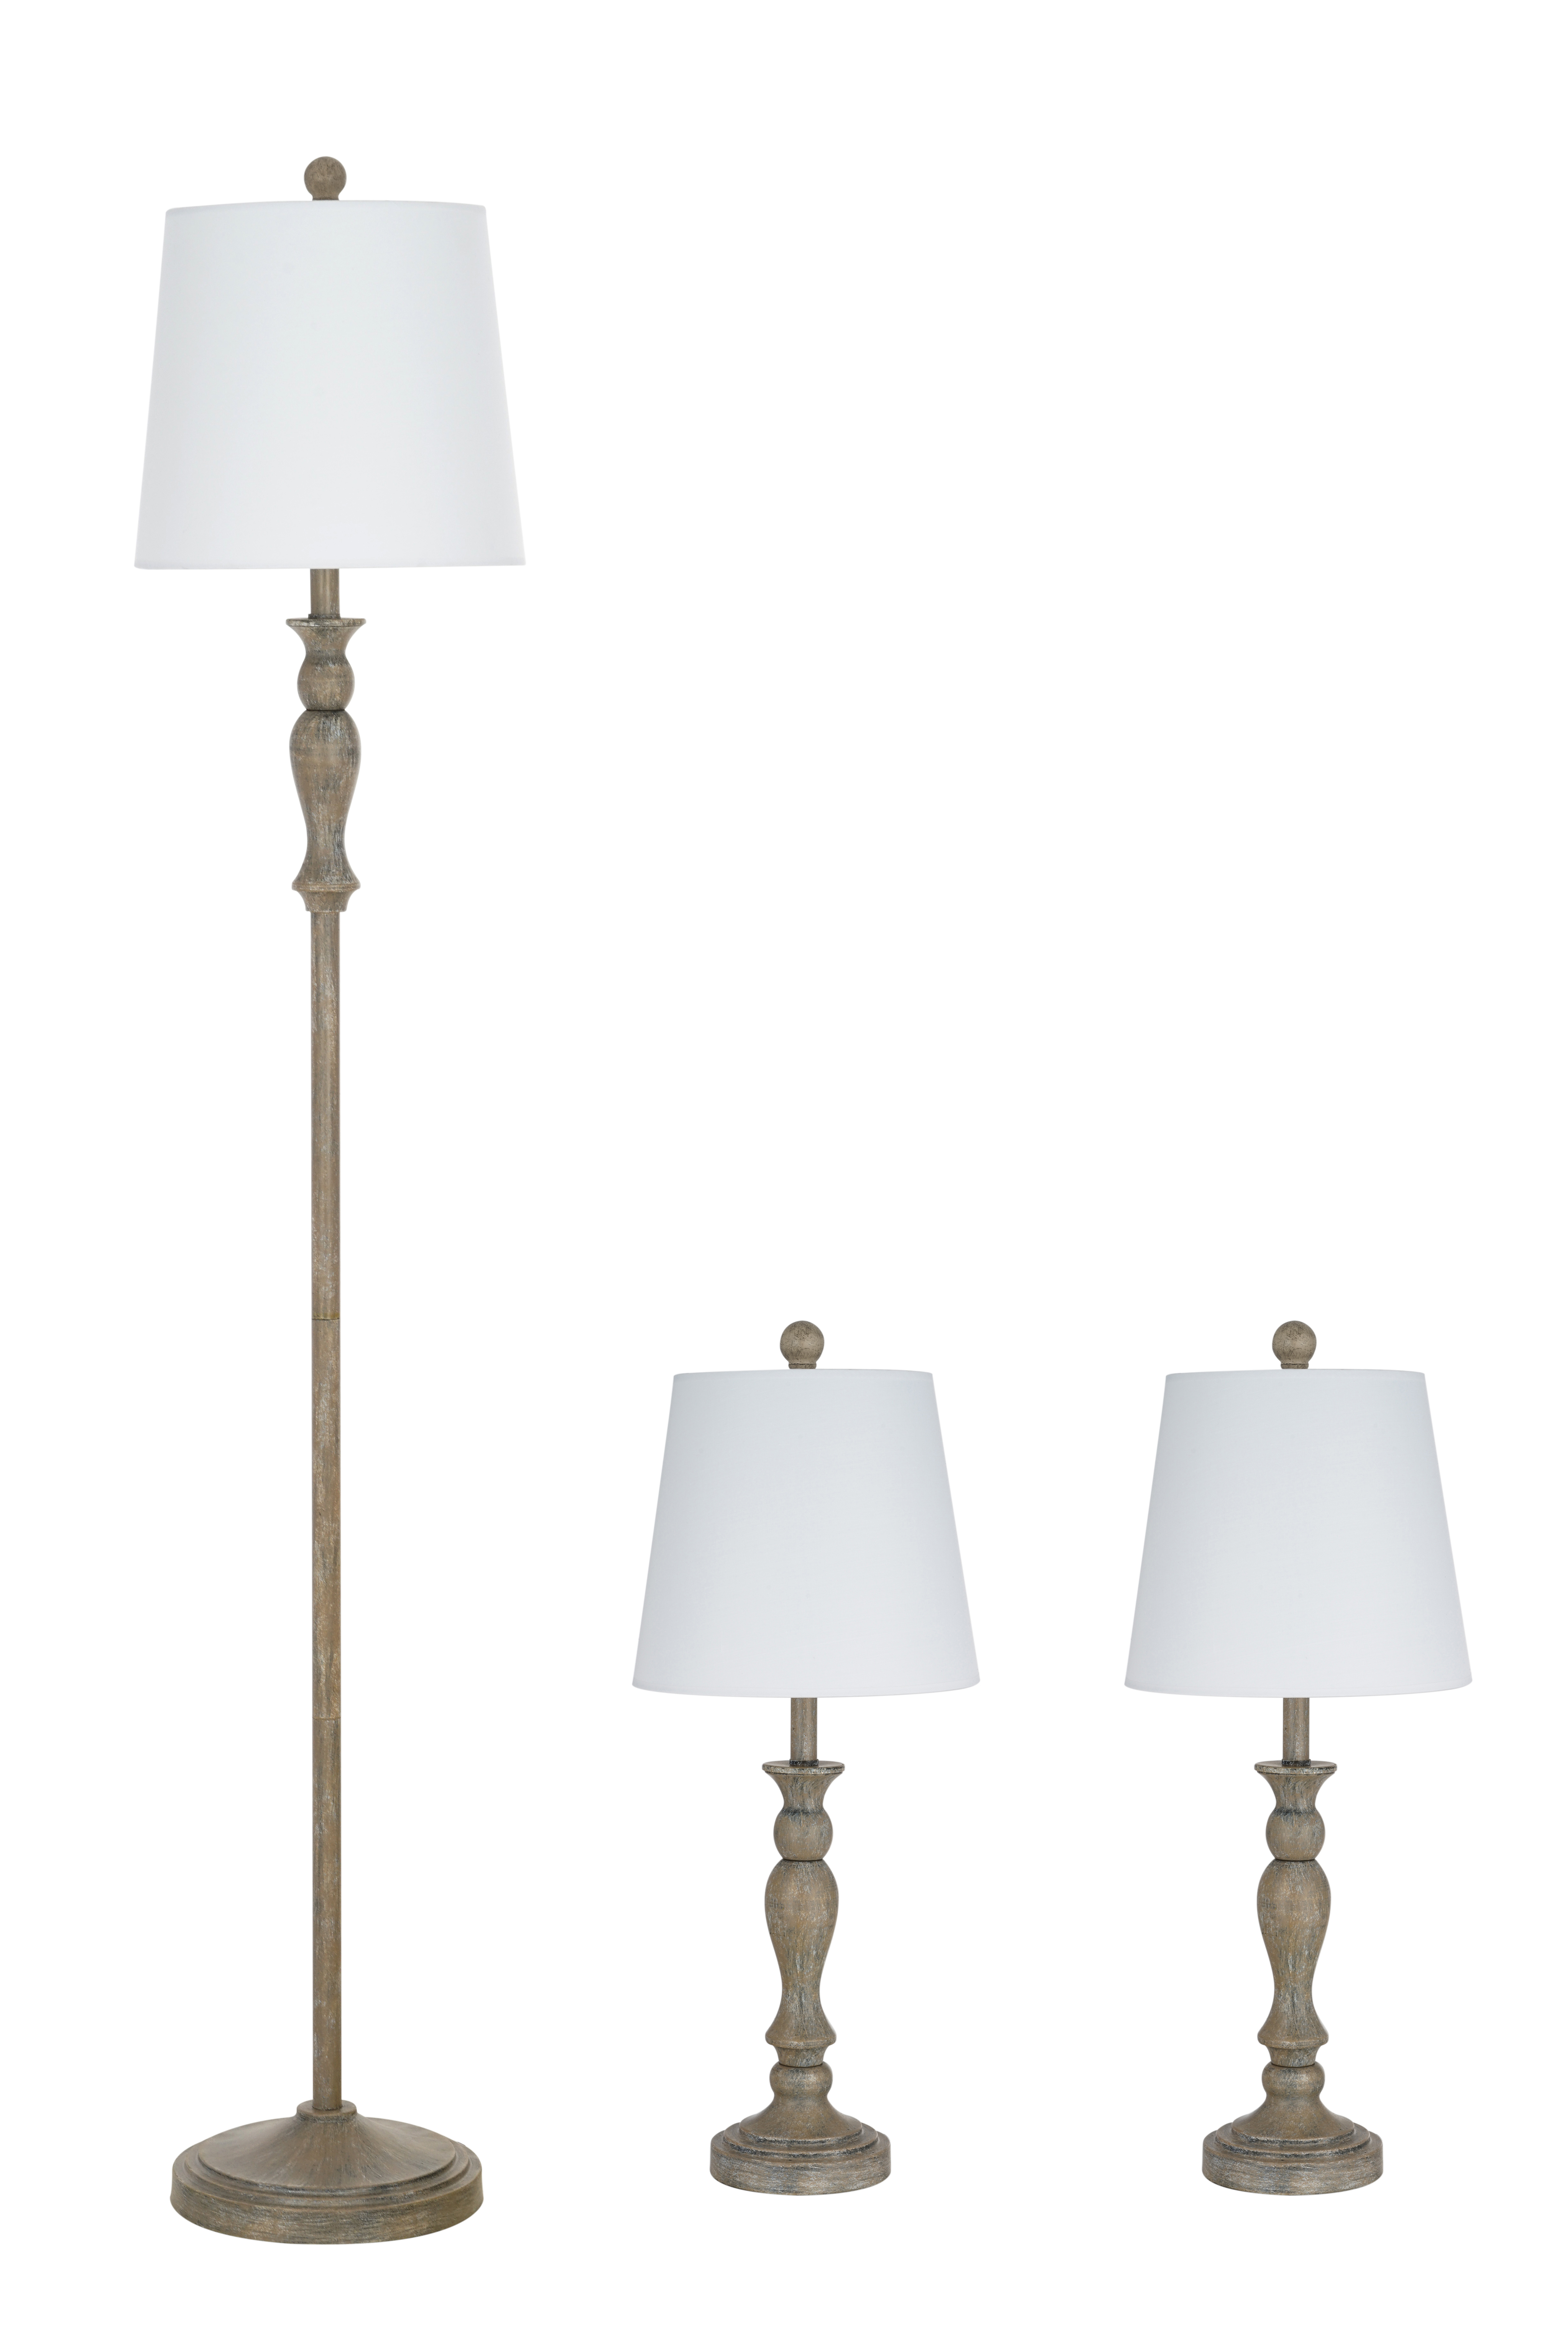 Better Homes & Gardens Modern Farmhouse 3-Pack Table and Floor Lamp Set, Wood Finish - image 1 of 4